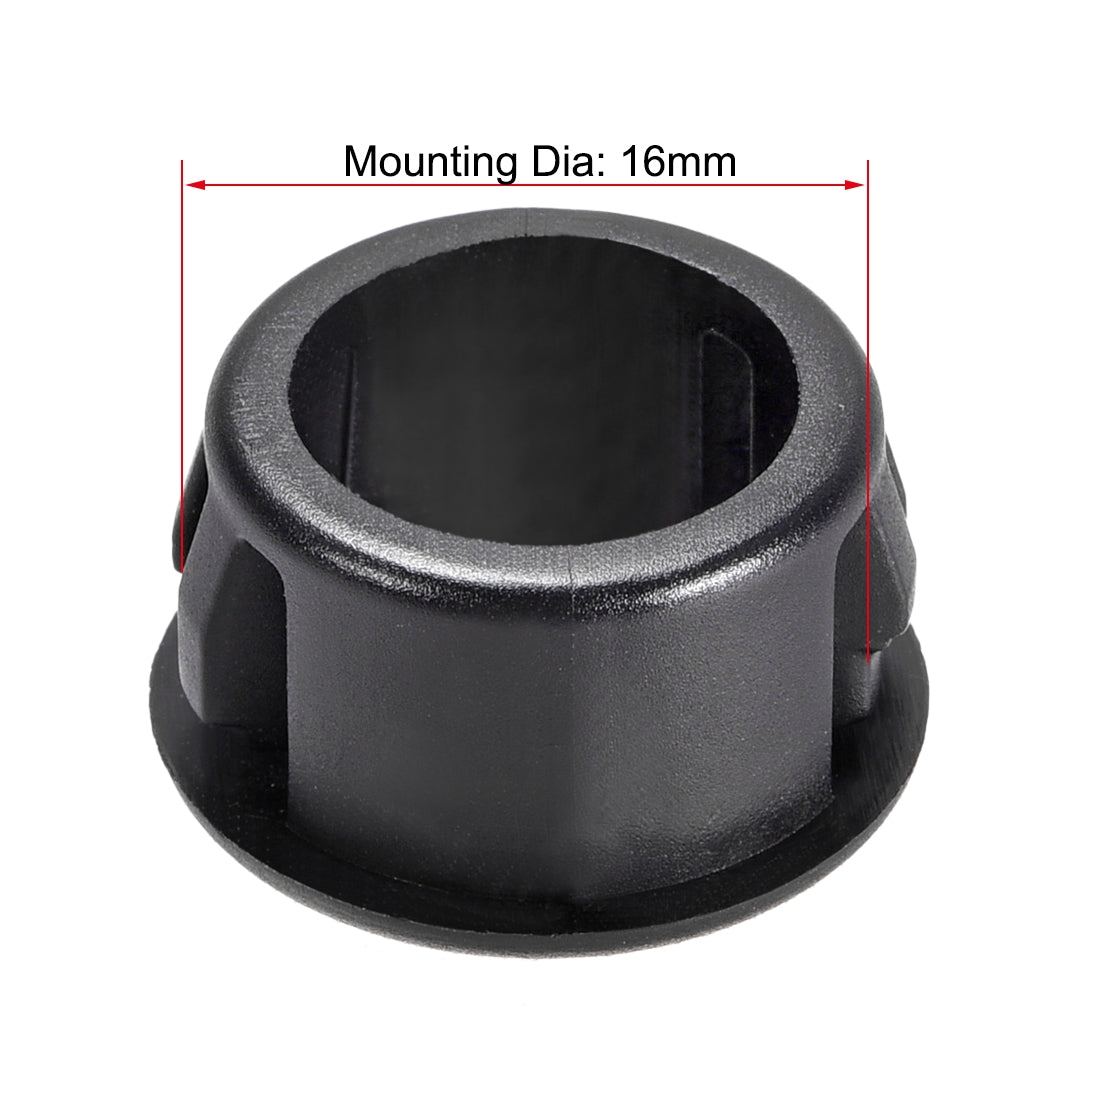 Uxcell Uxcell 22mm Mounted Dia Cable Hose Snap Bushing Grommet Protector Black 30pcs